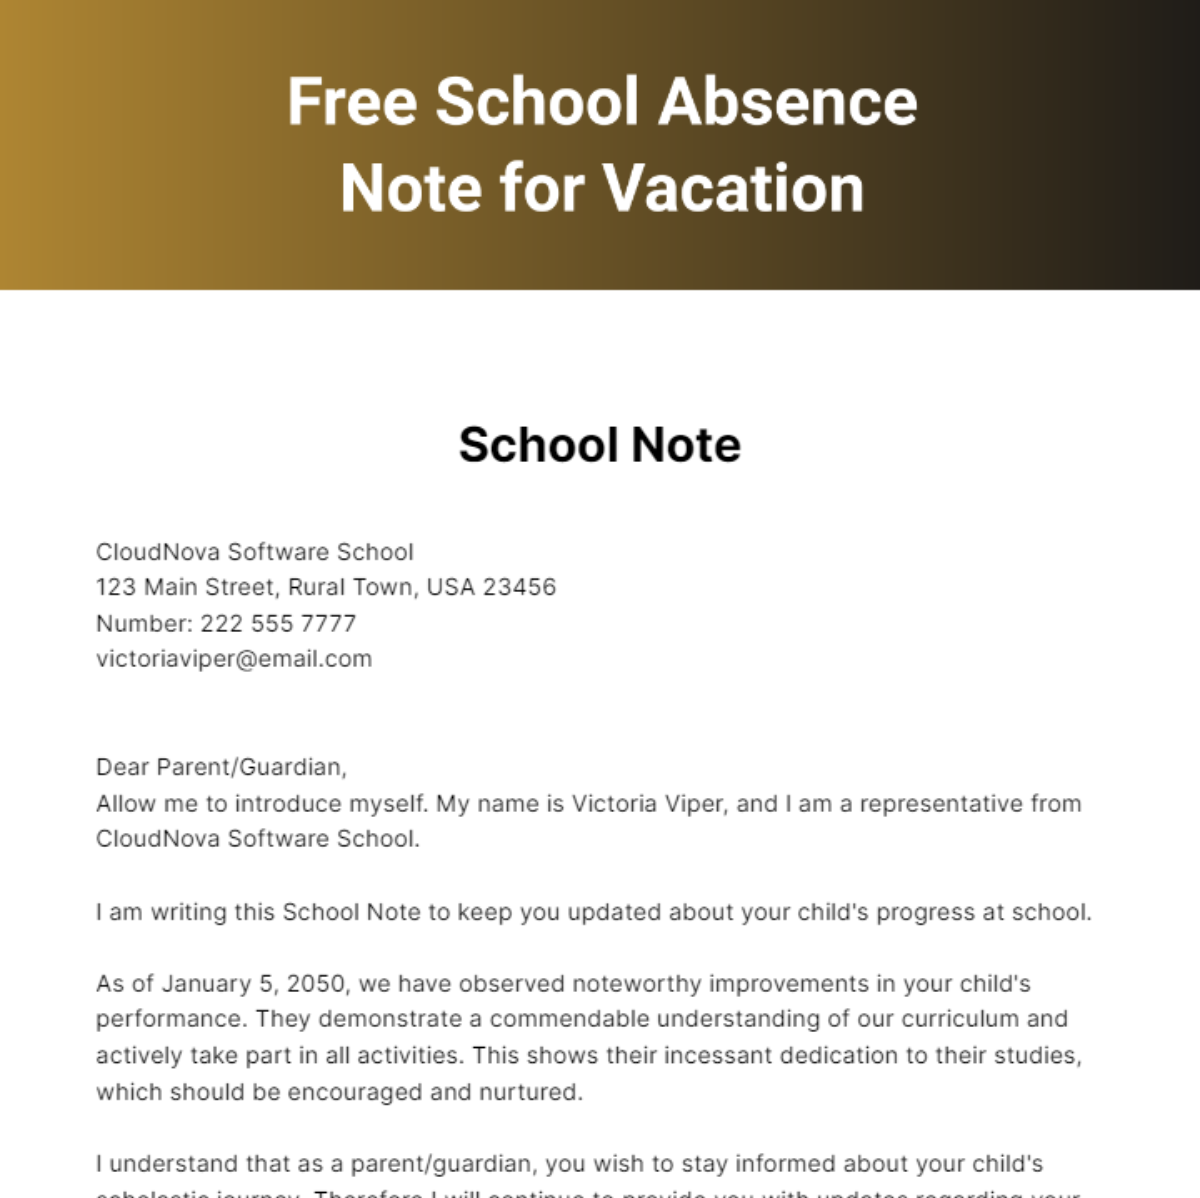 School Absence Note for Vacation Template